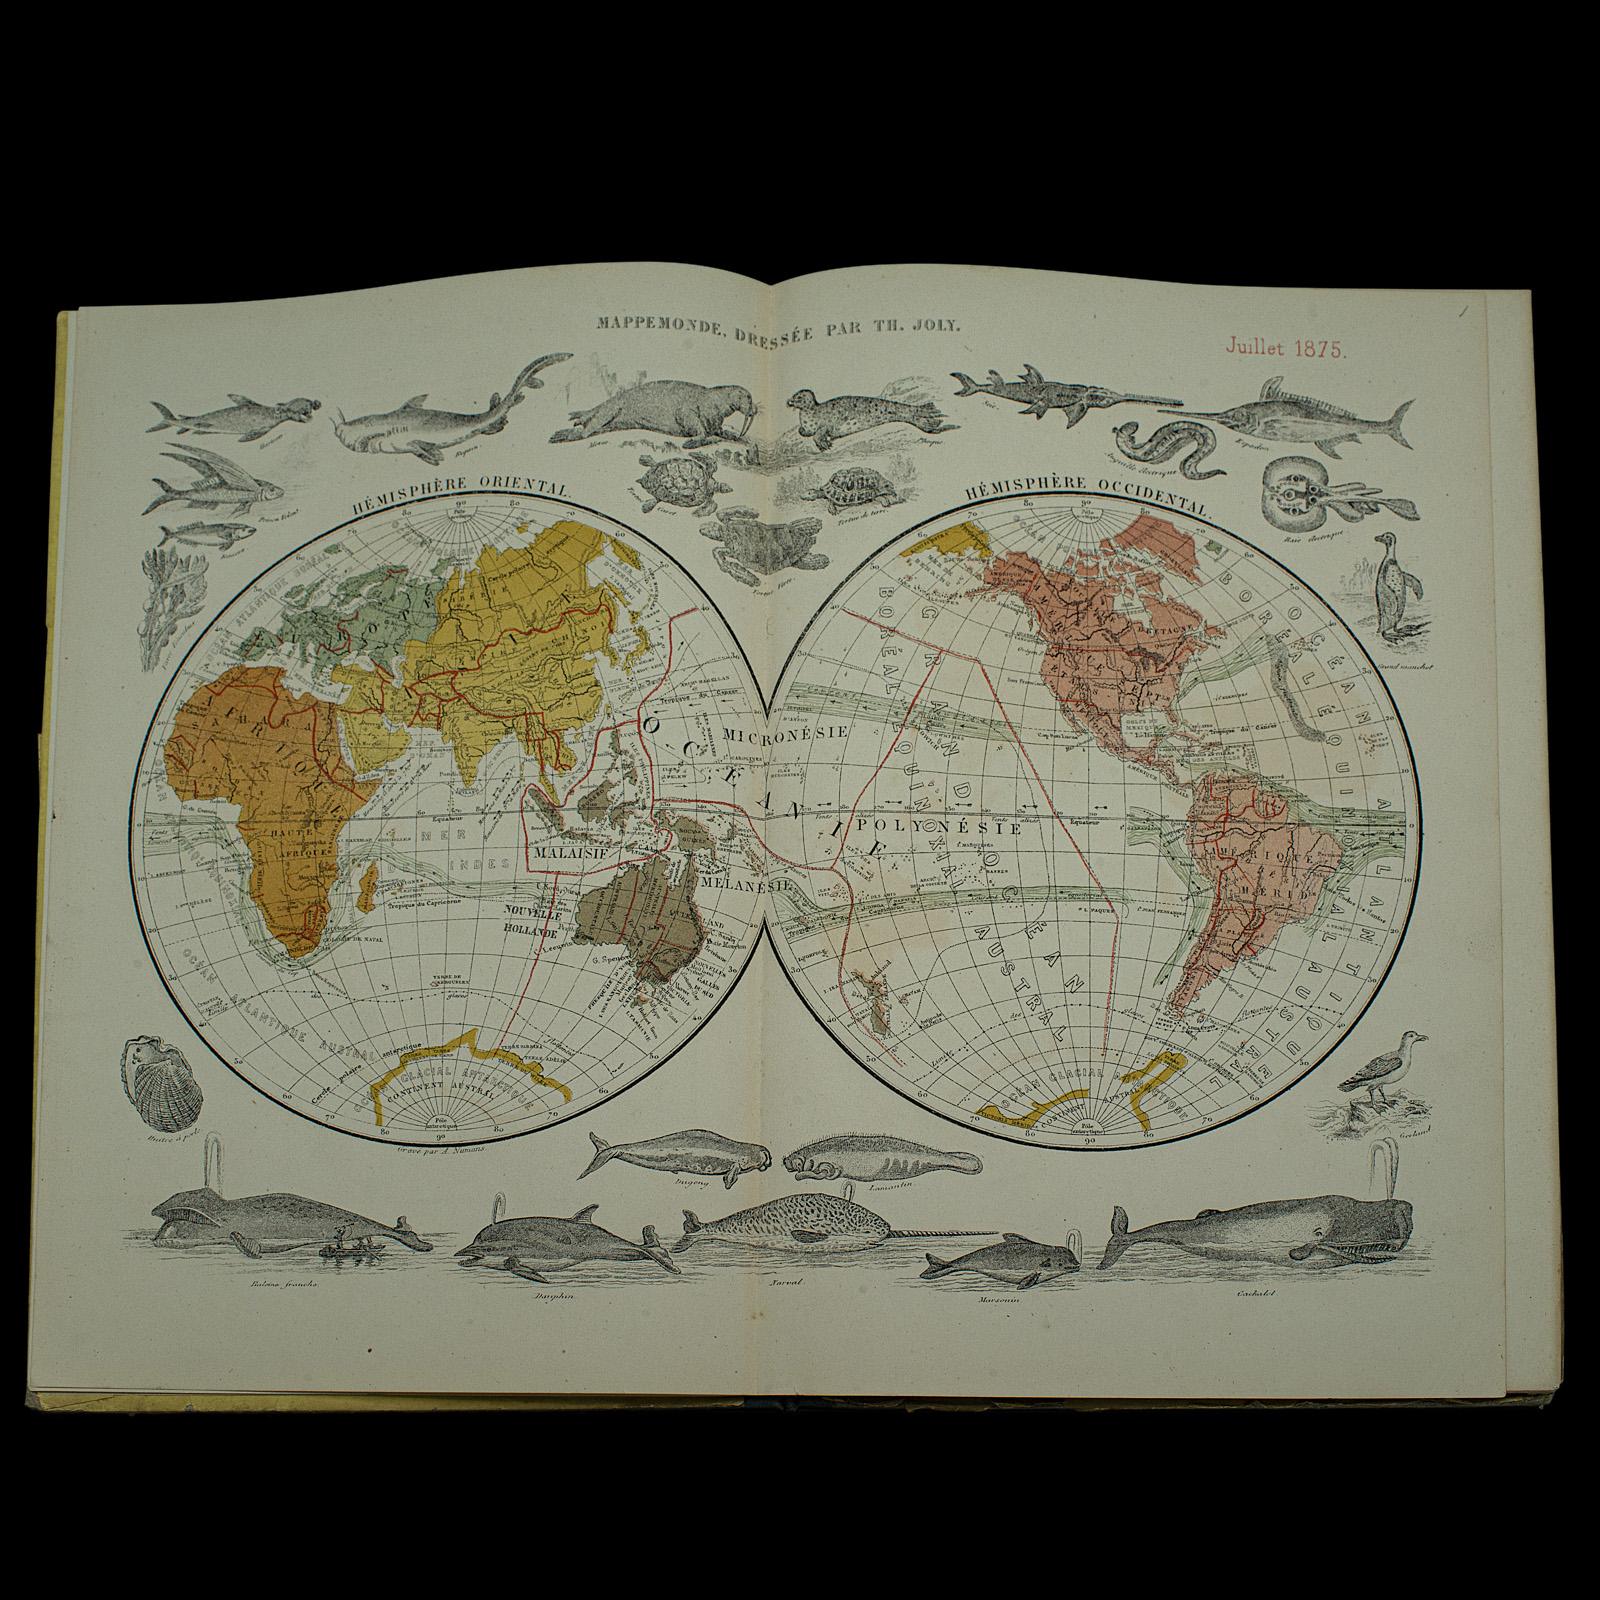 Paper Antique World Atlas, French Language, Cartography, Reference Book, Victorian